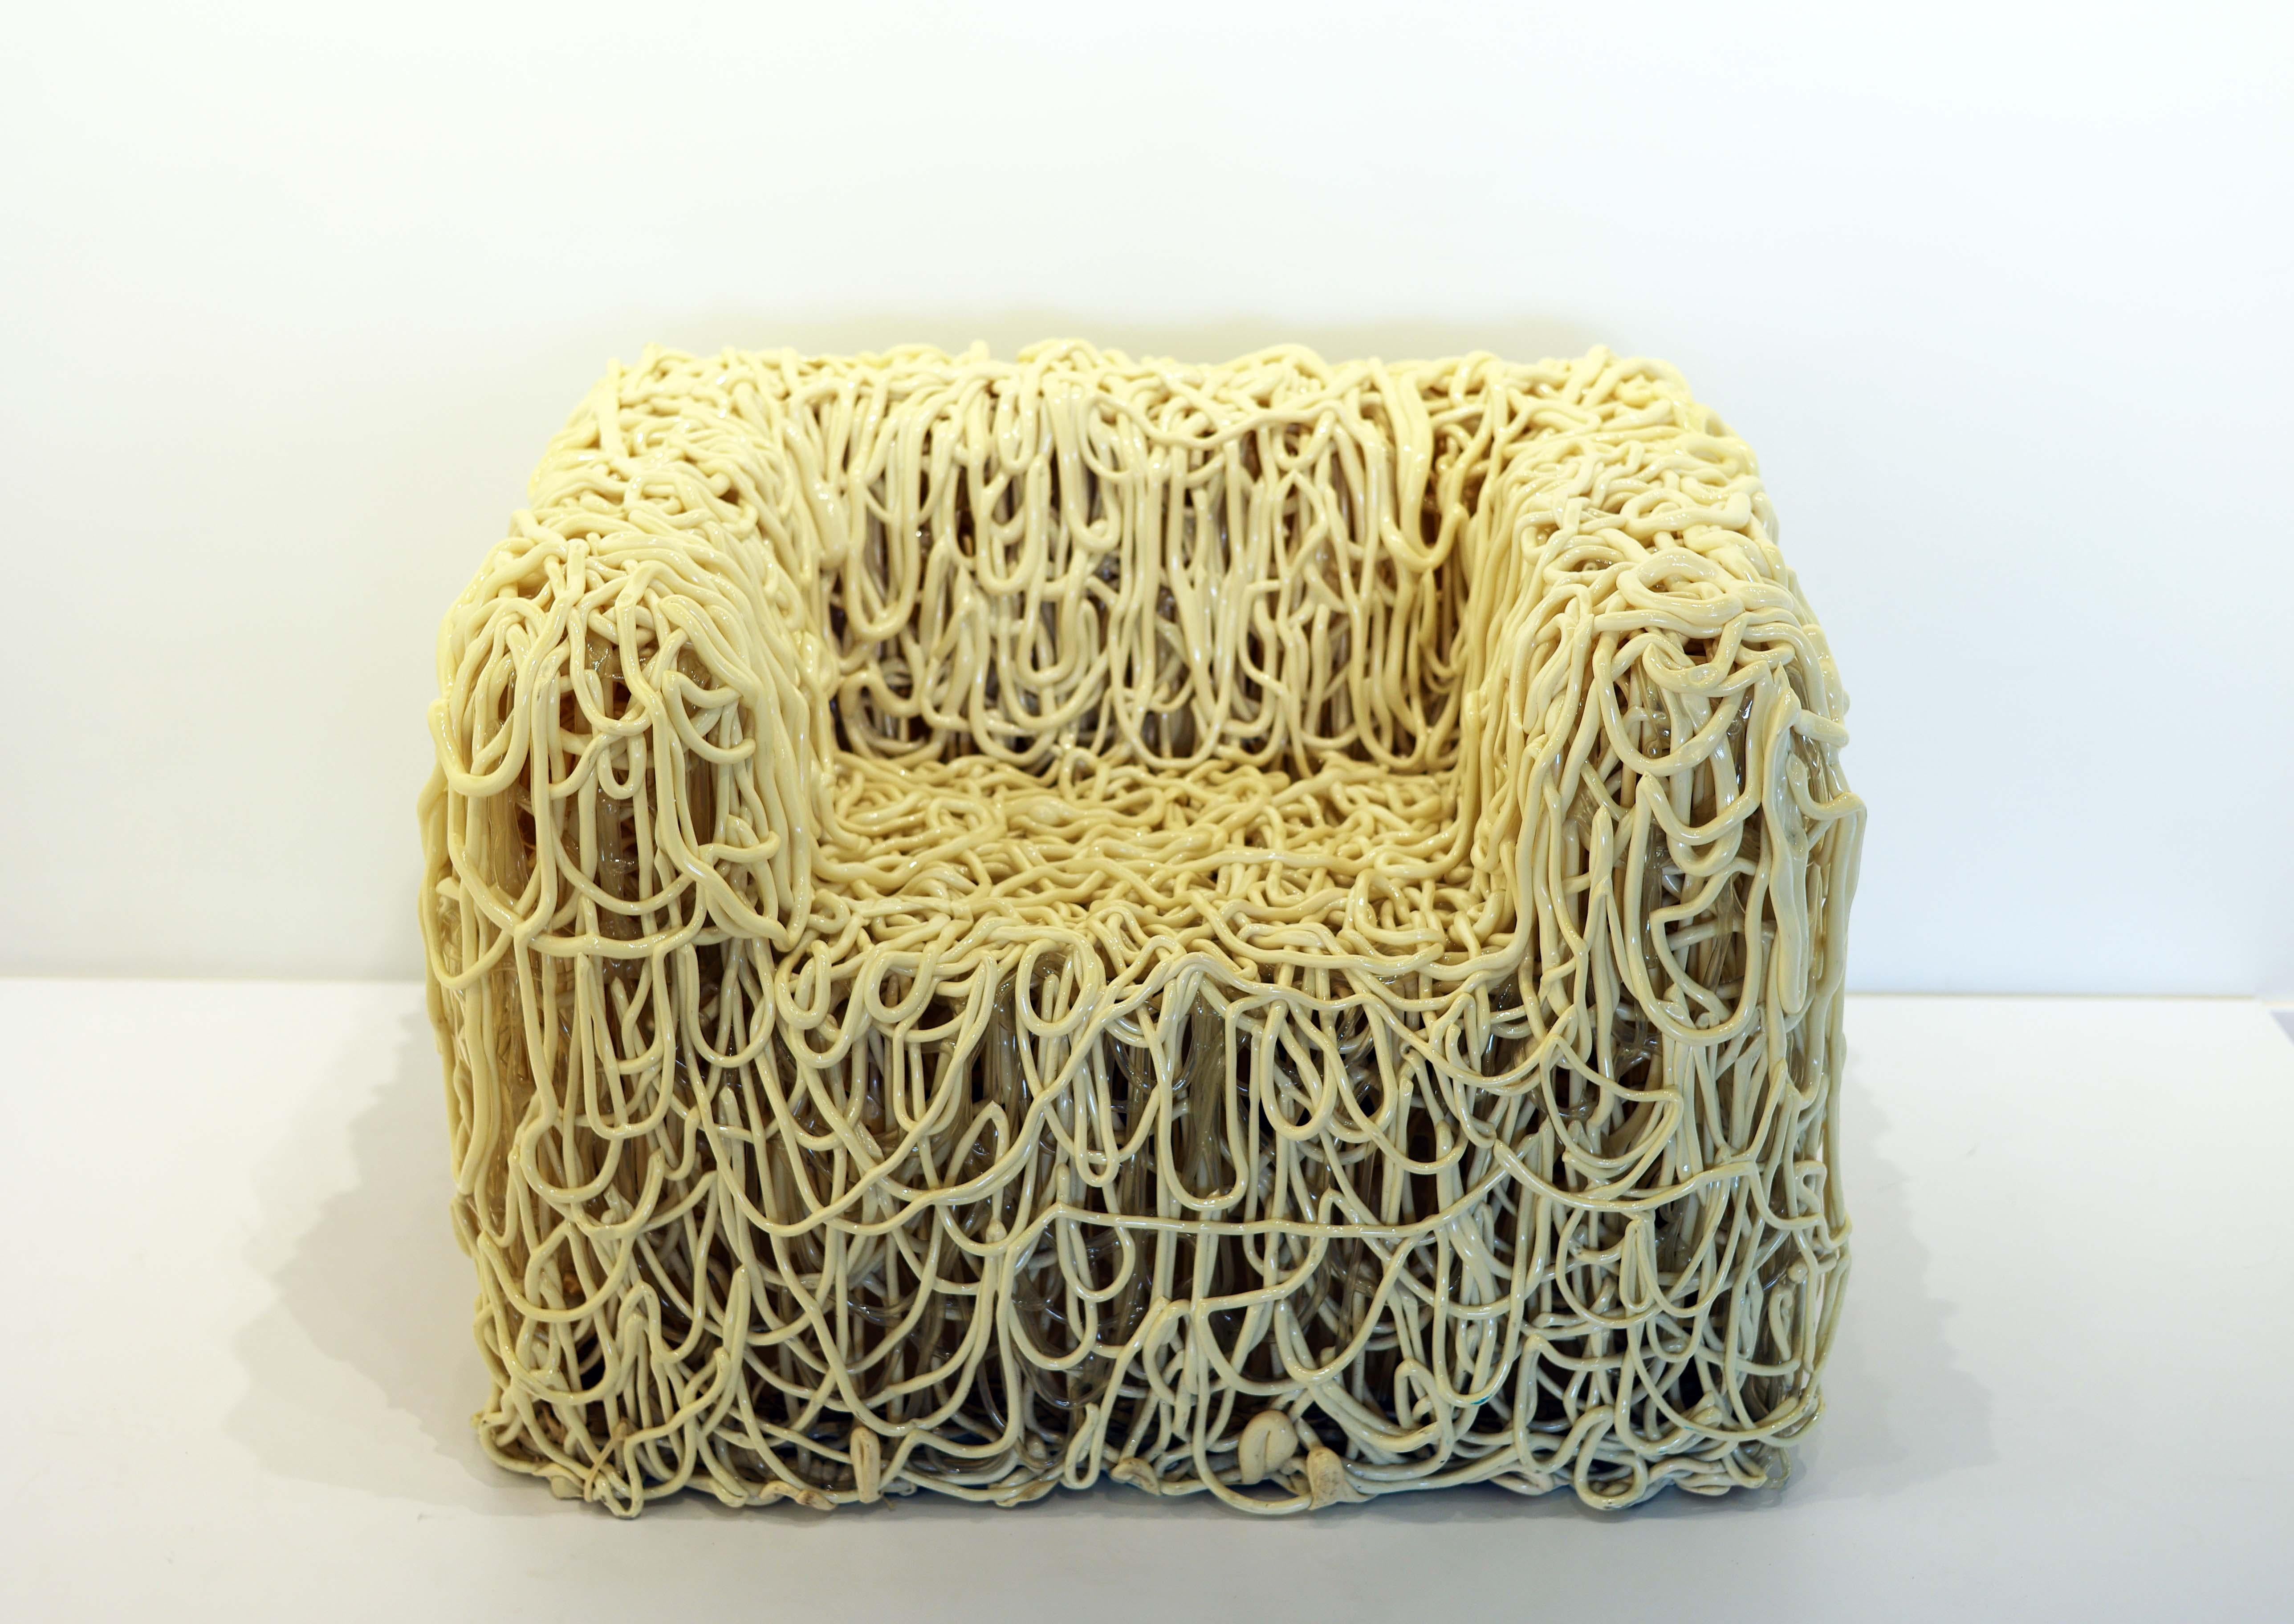 A cord of extruded polyurethane molded into the shape of a chair. Each chair is a unique work of art. This is a very heavy example with both clear and off white cords. One of very few if not the only example with two colors of polyurethane. In